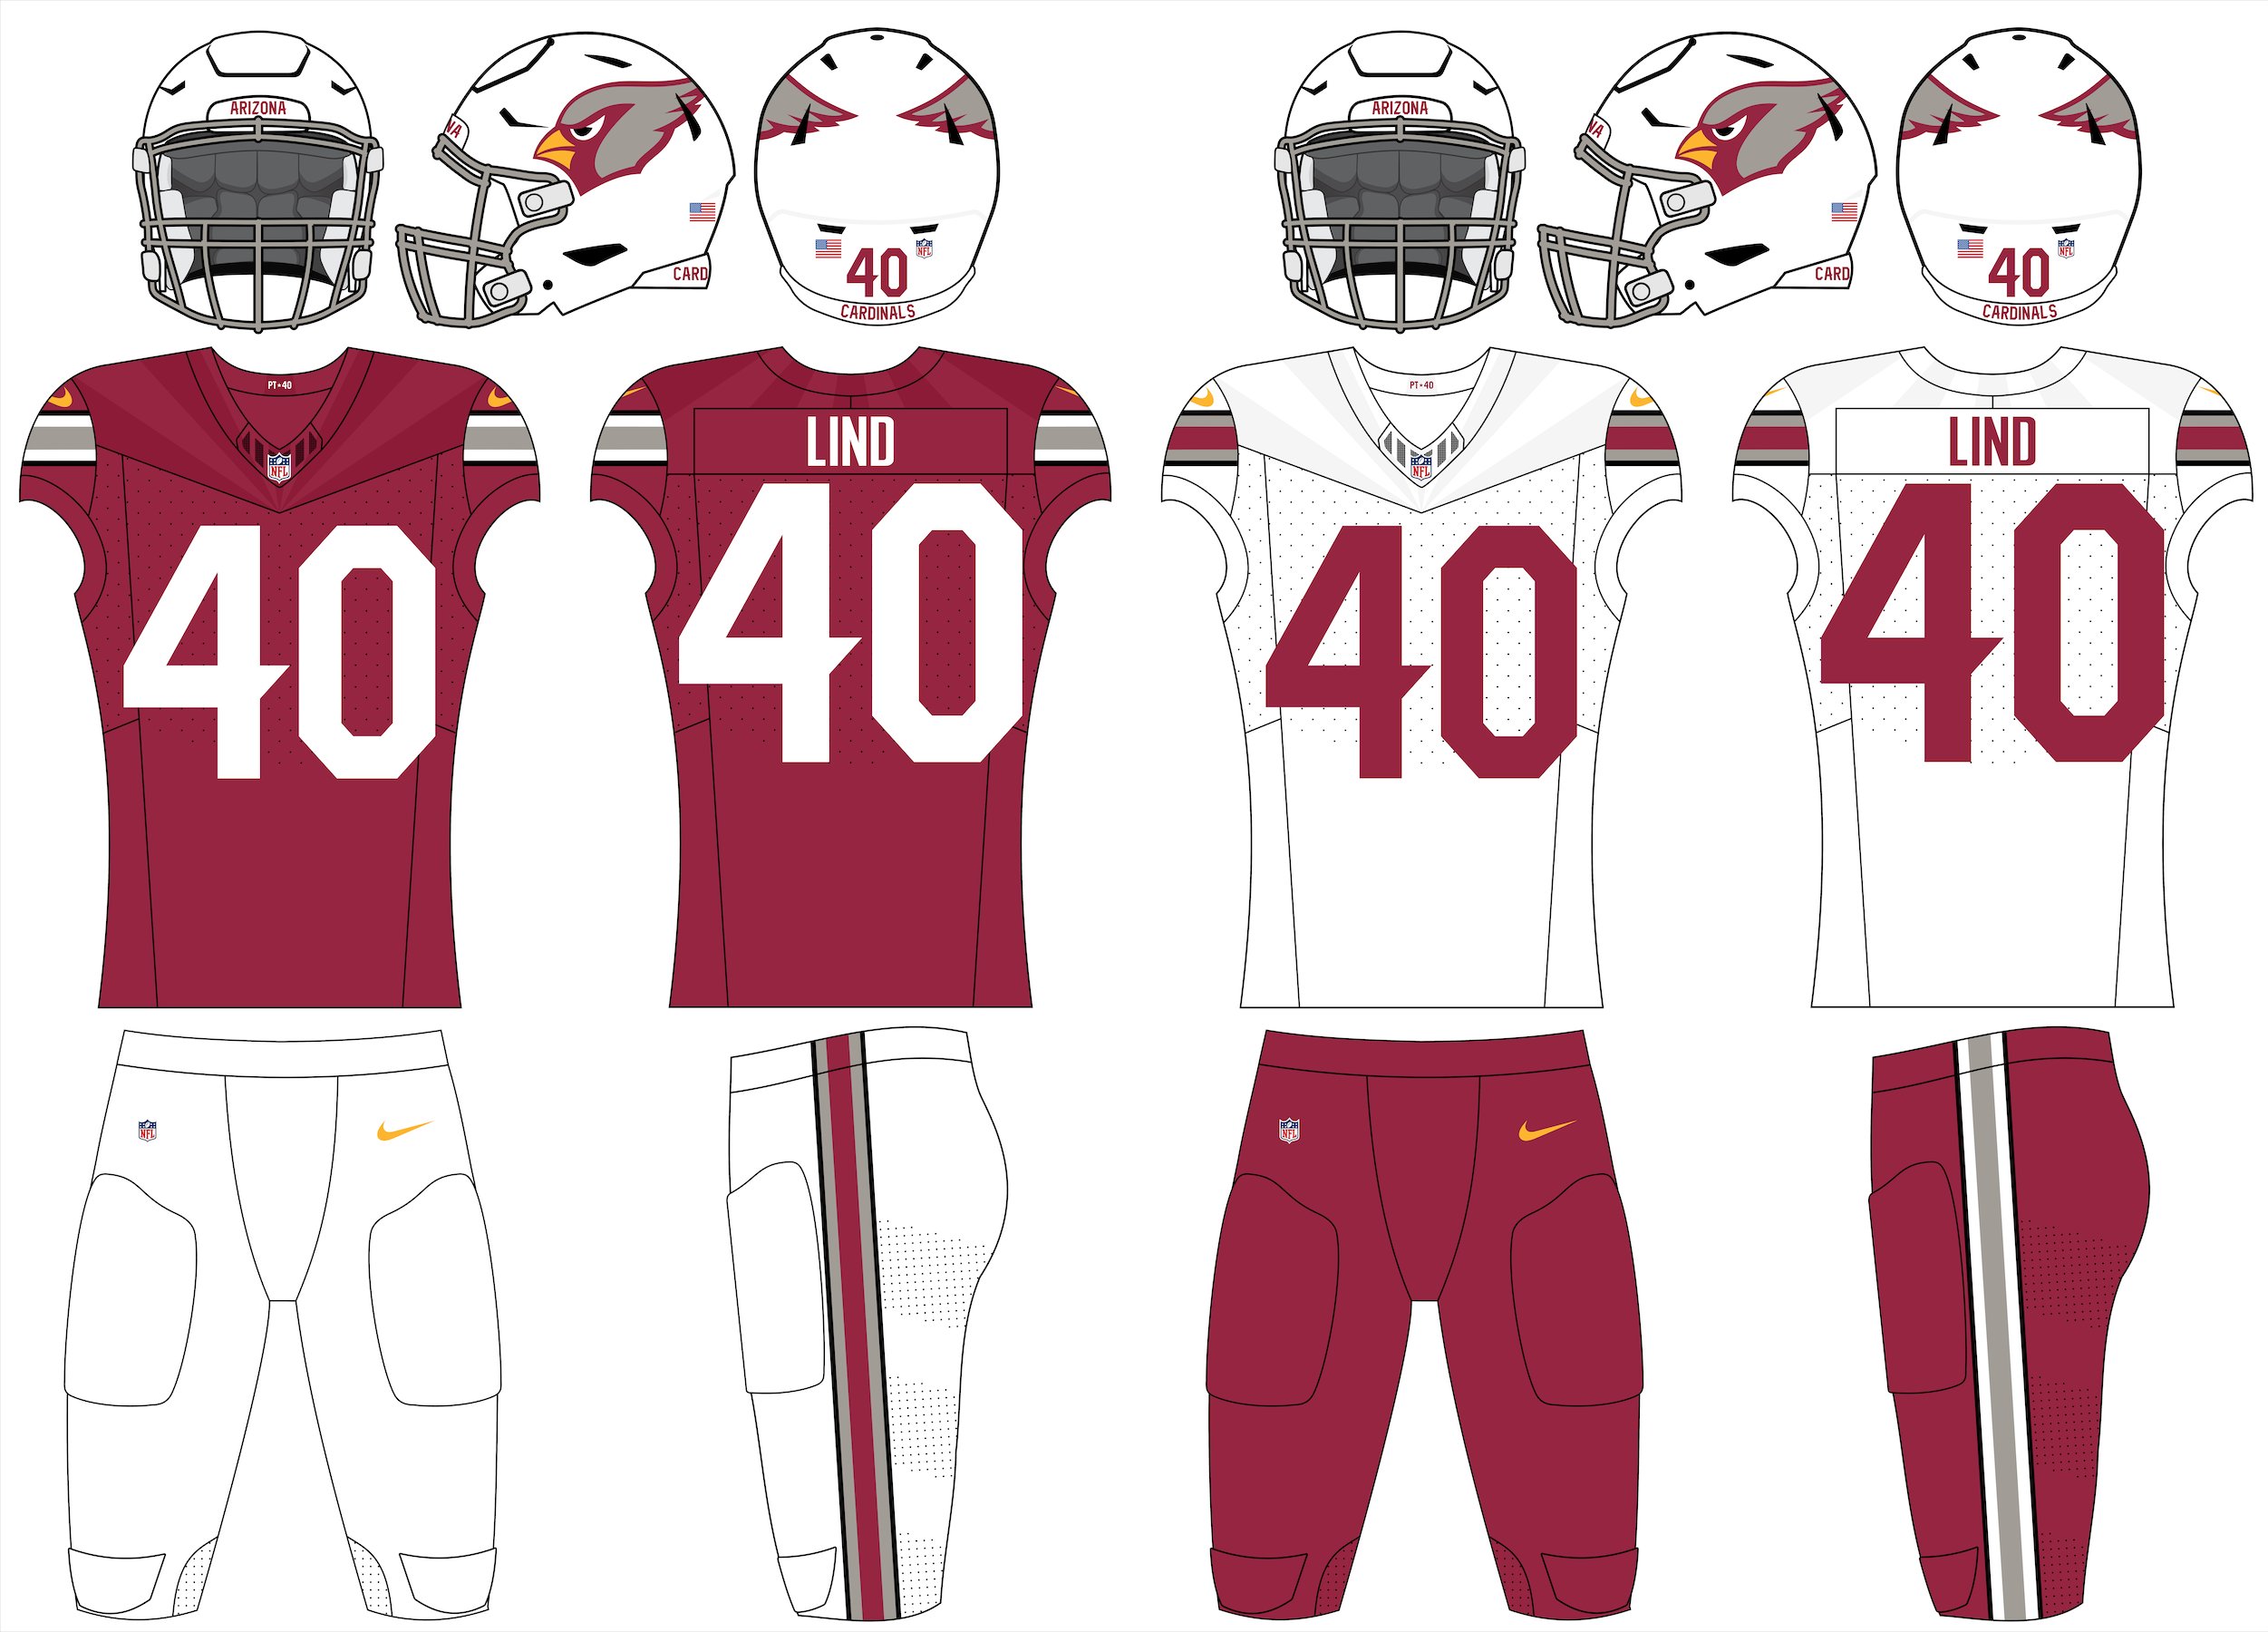 Andrew Lind on X: My submission for the #ArizonaCardinalsRedesign